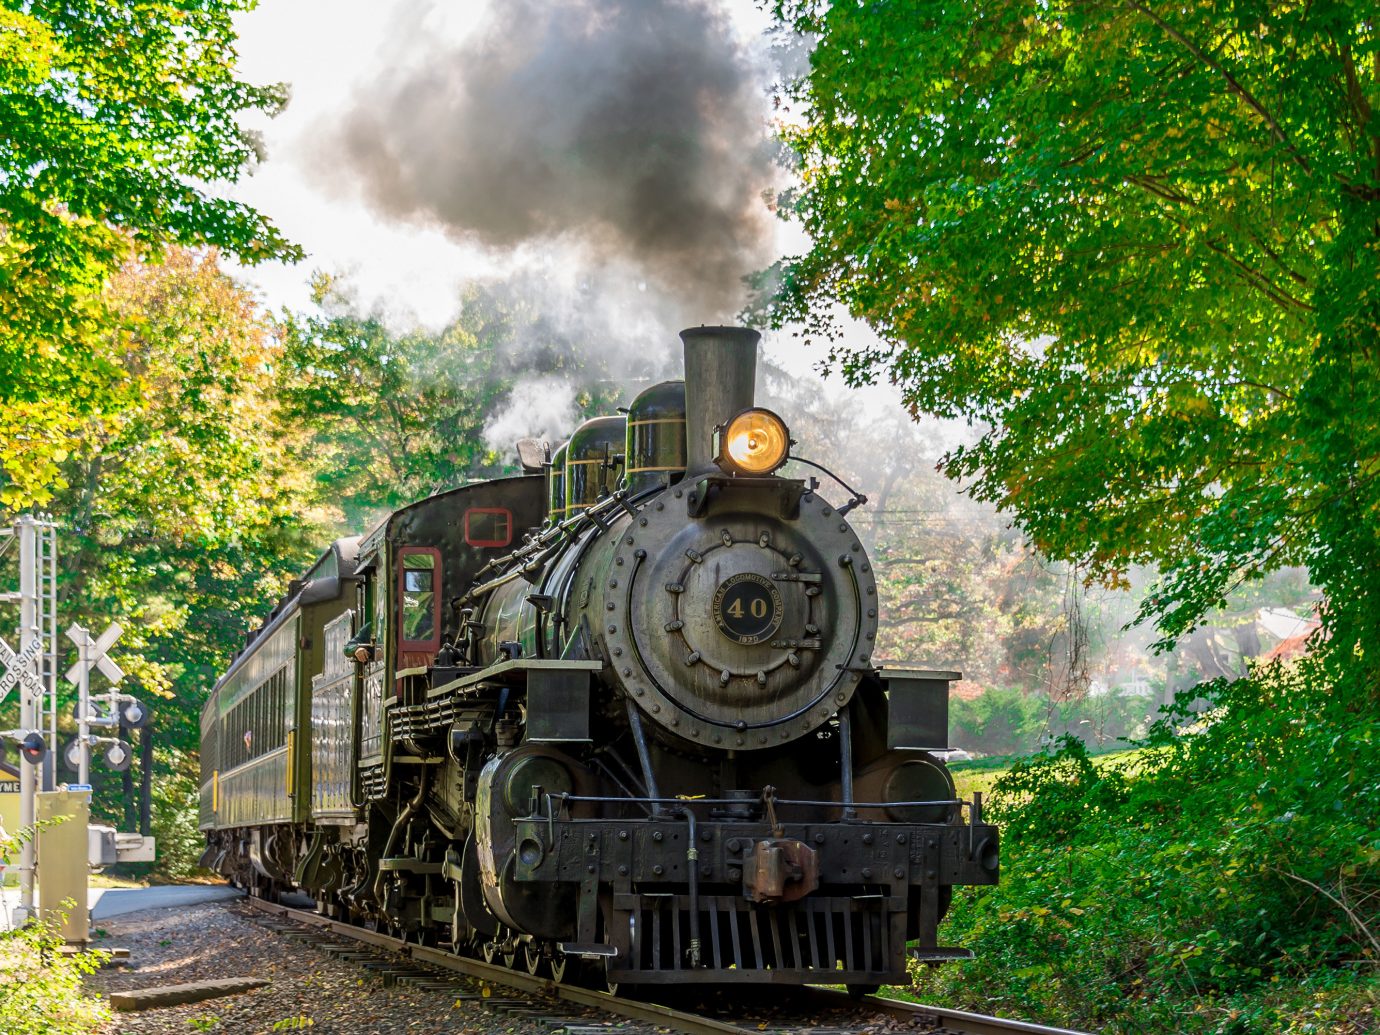 Family Travel Trip Ideas Weekend Getaways tree train track outdoor transport steam engine locomotive vehicle land vehicle rail transport steam engine rolling stock coming old smoke automotive engine part Forest railroad traveling wooded